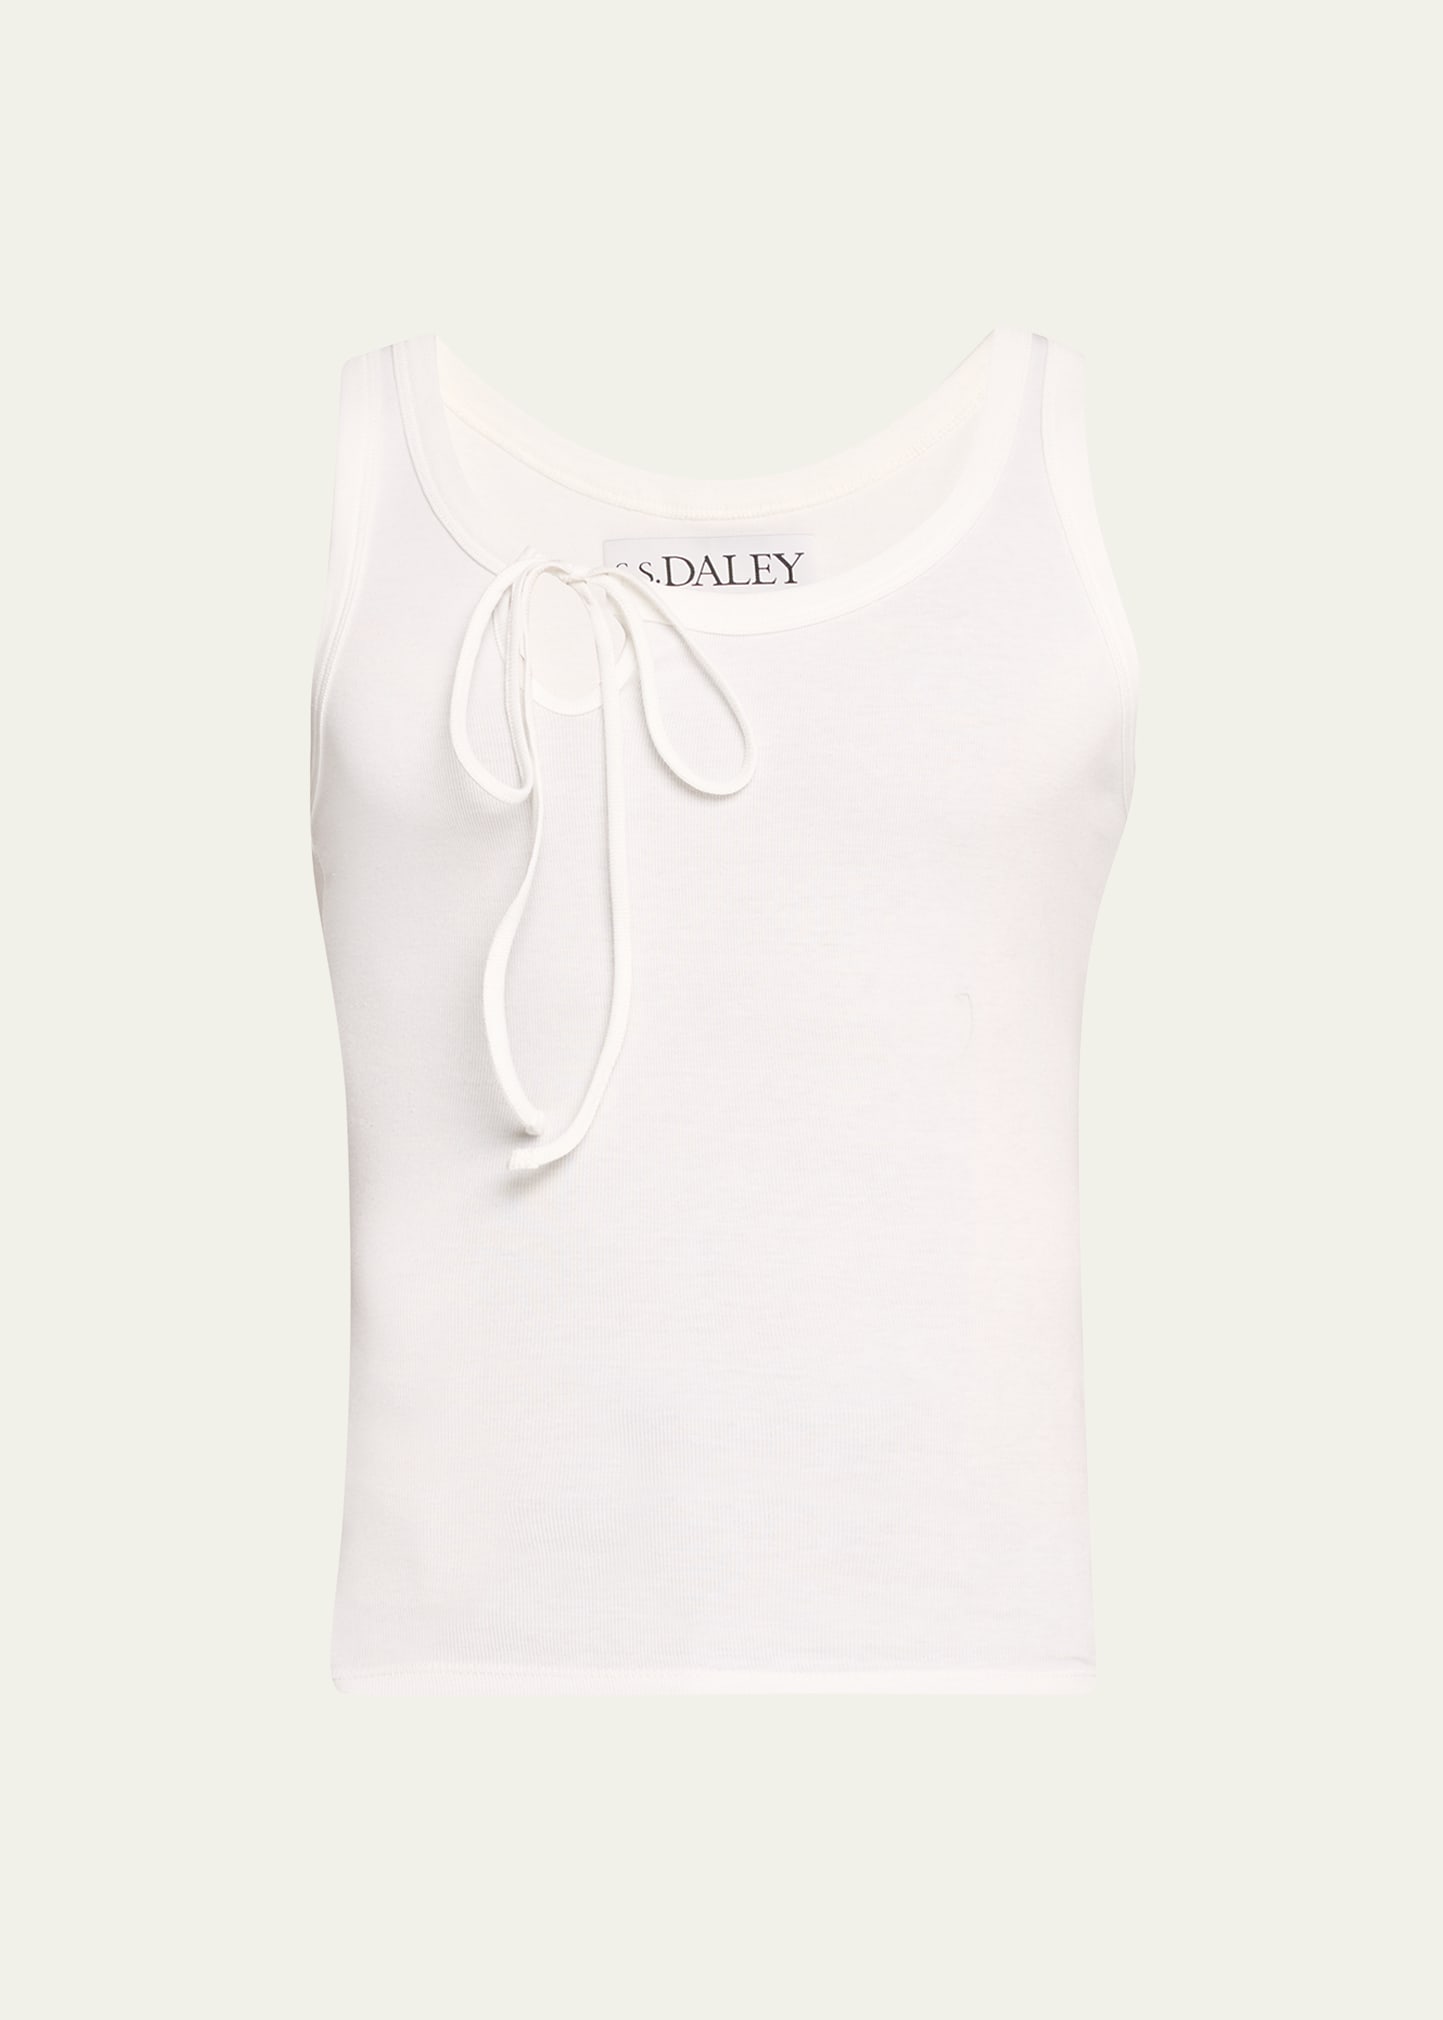 S.S. DALEY Men's Solid Jersey Keyhole Tank Top